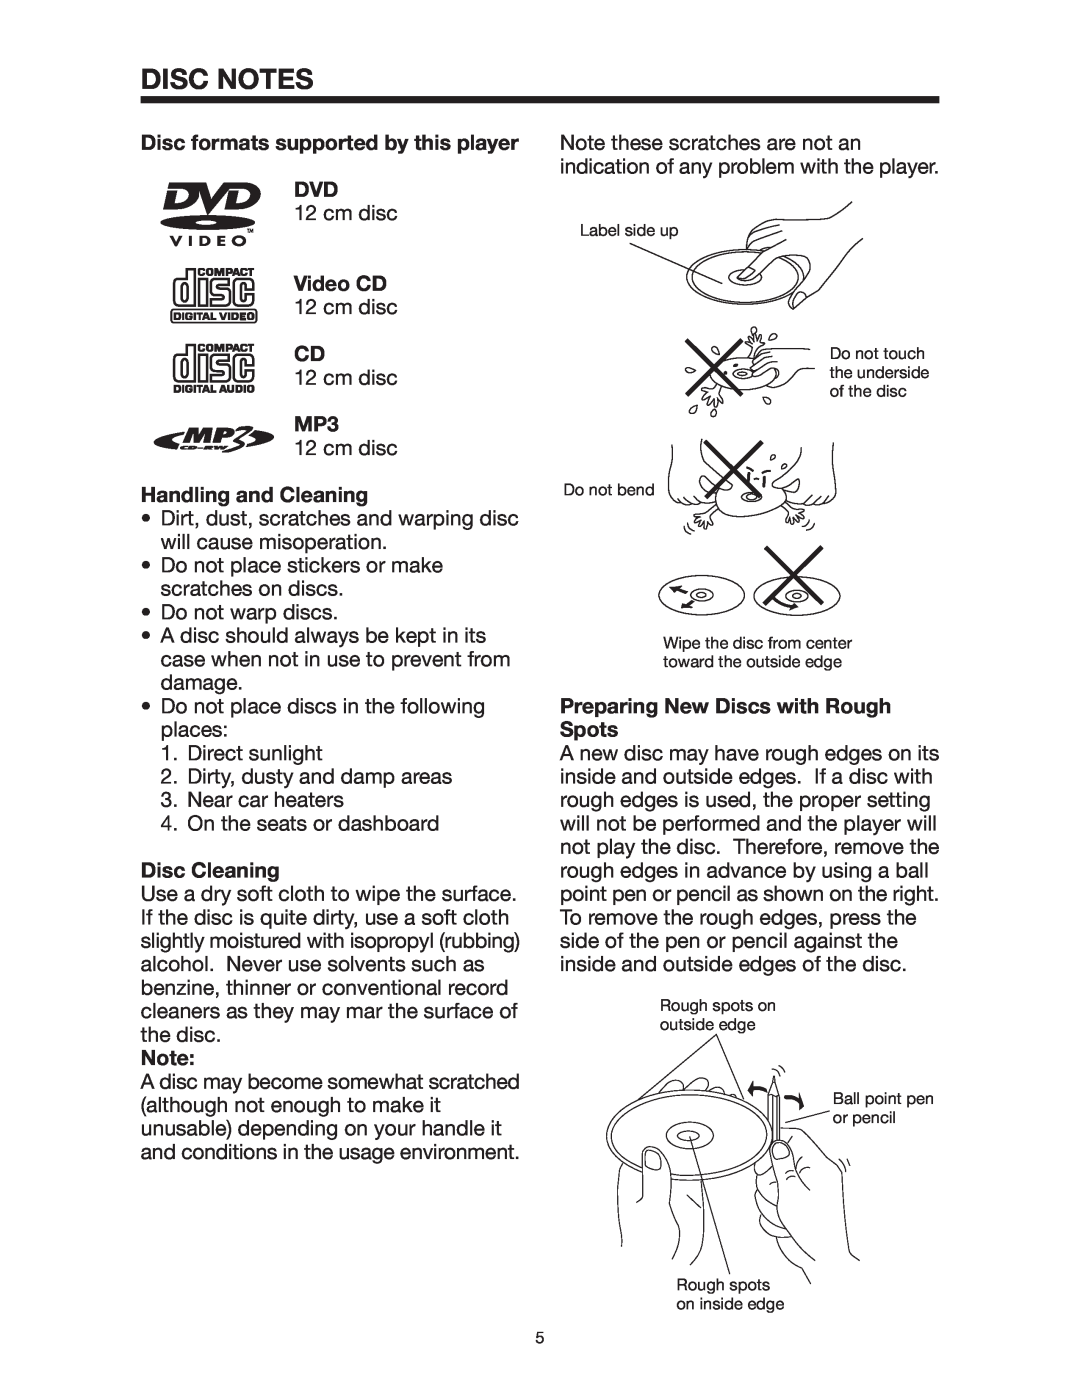 PYLE Audio PLD142 owner manual Disc Notes, Disc formats supported by this player DVD, Handling and Cleaning, Disc Cleaning 